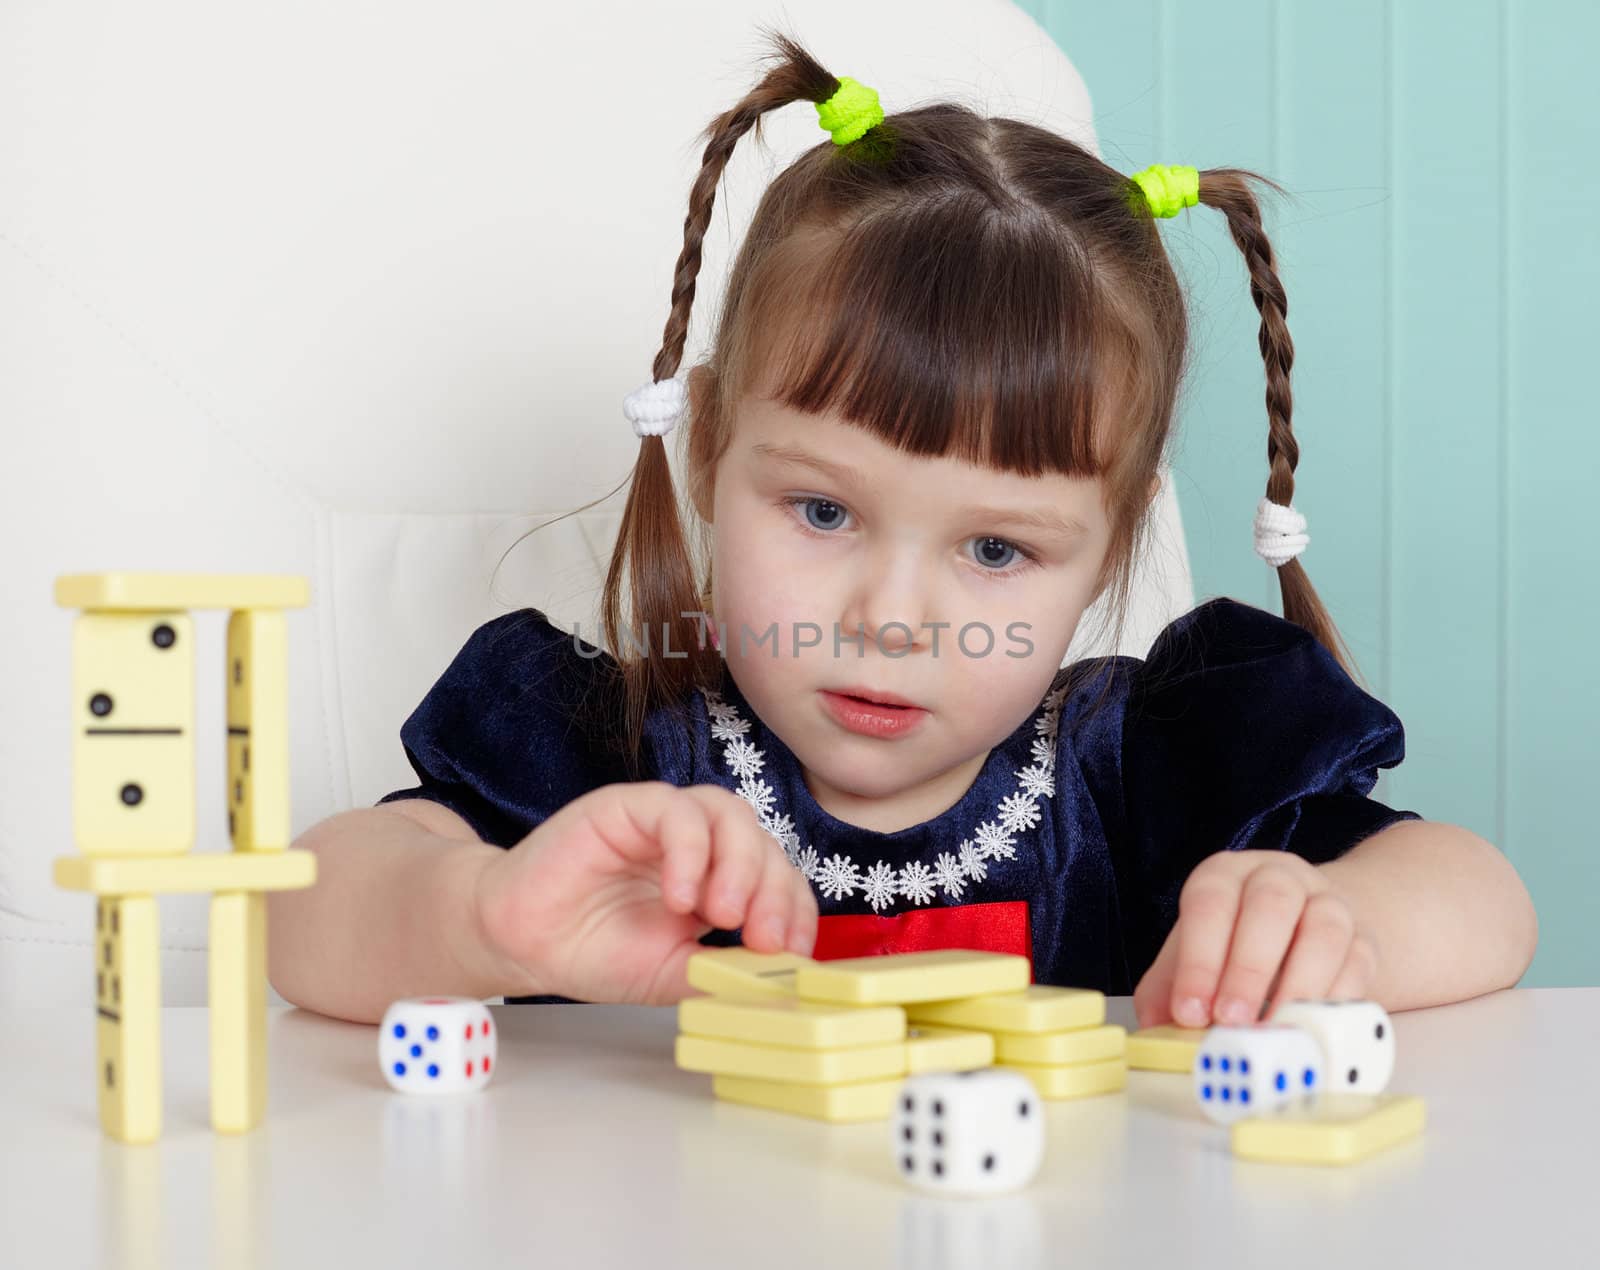 A child playing with small toys, sitting at the table